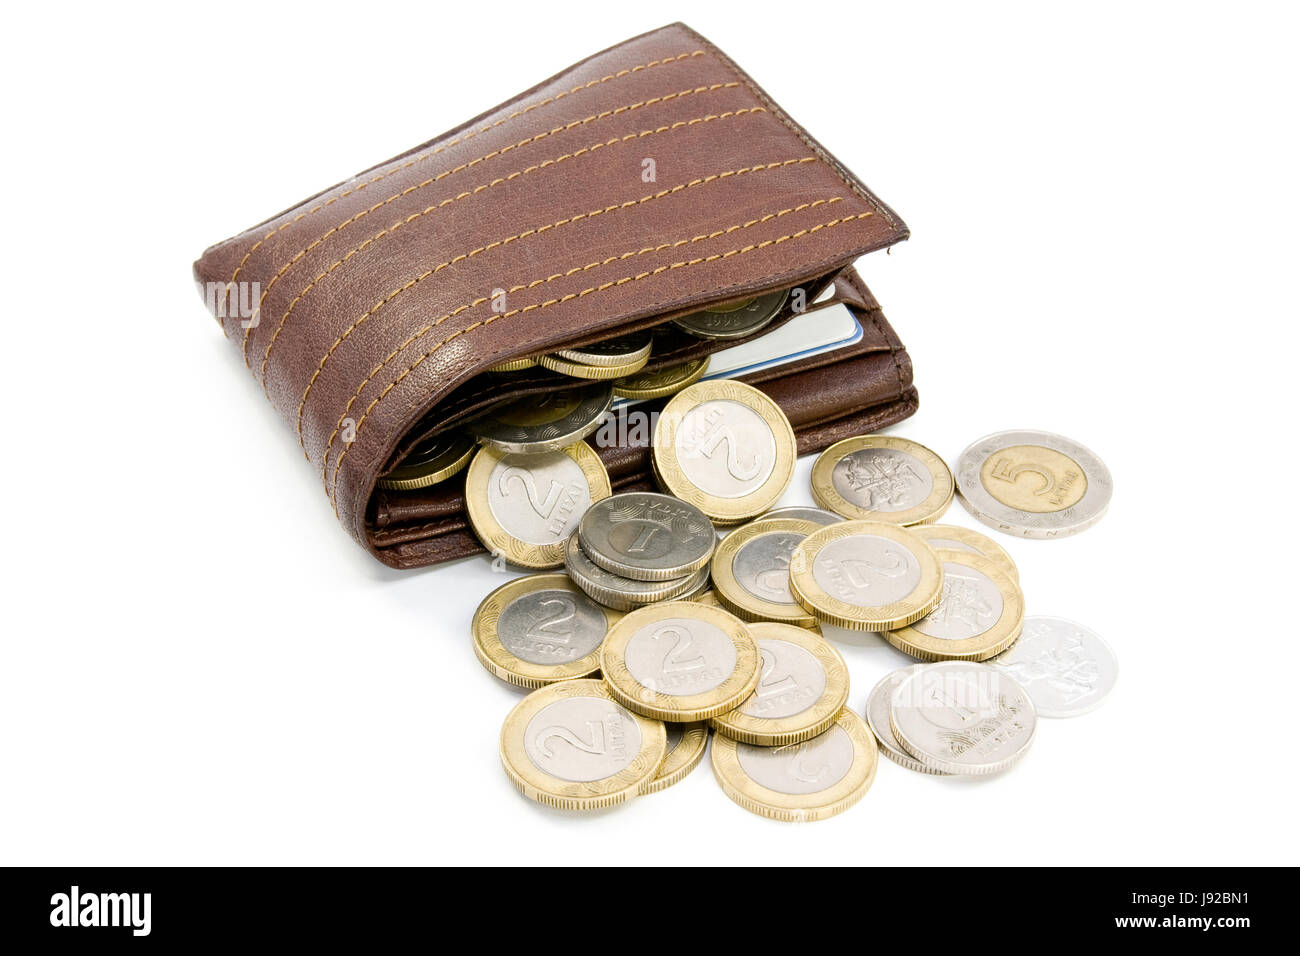 currency, coins, business dealings, deal, business transaction, business, Stock Photo